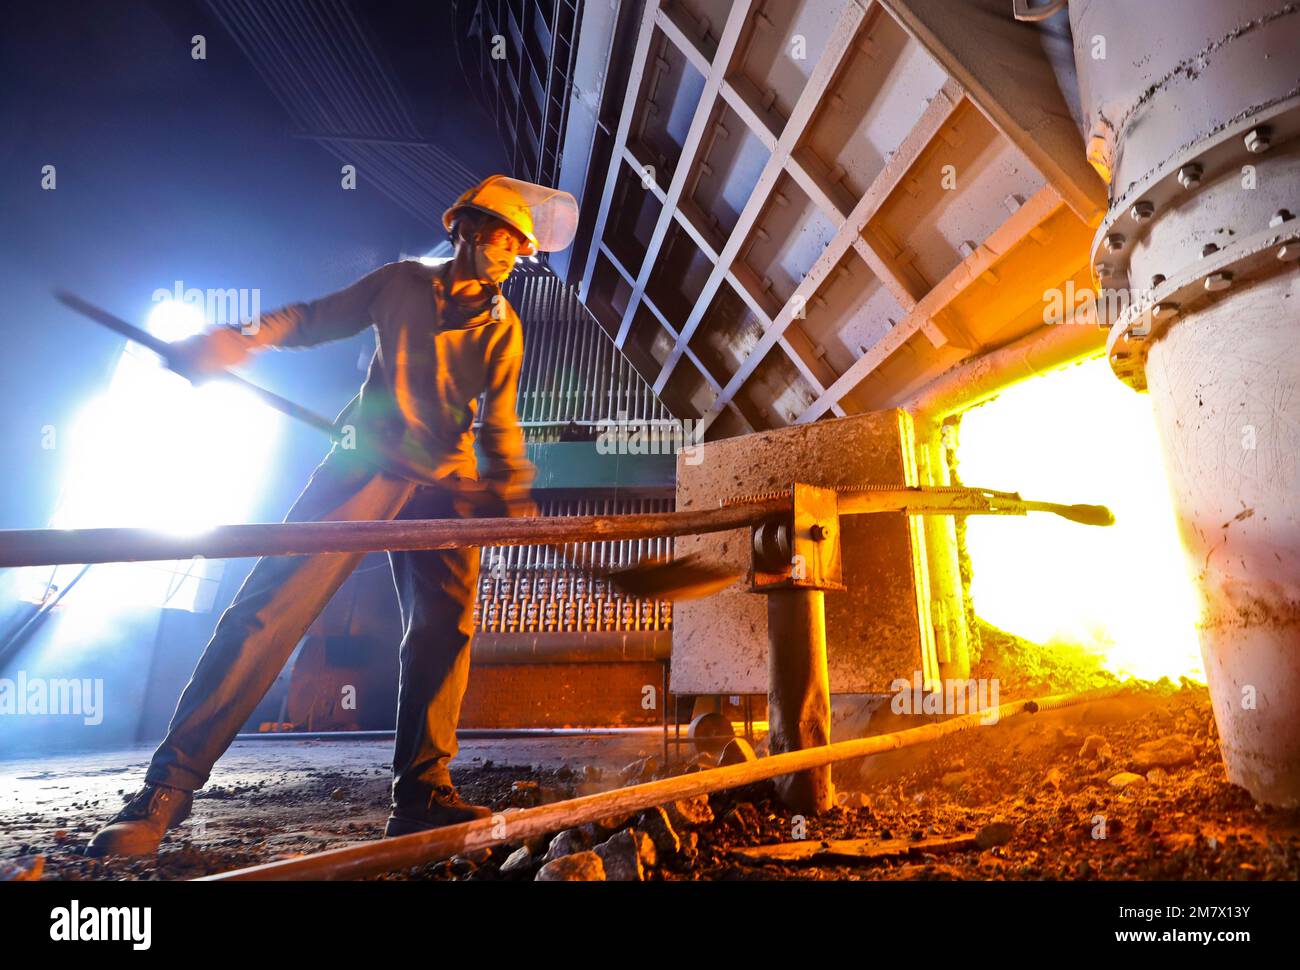 ZHANGYE, CHINA - JANUARY 10, 2023 - A shaker sends silicon metal ore to a furnace at a smelting plant in Zhangye city, Northwest China's Gansu provinc Stock Photo